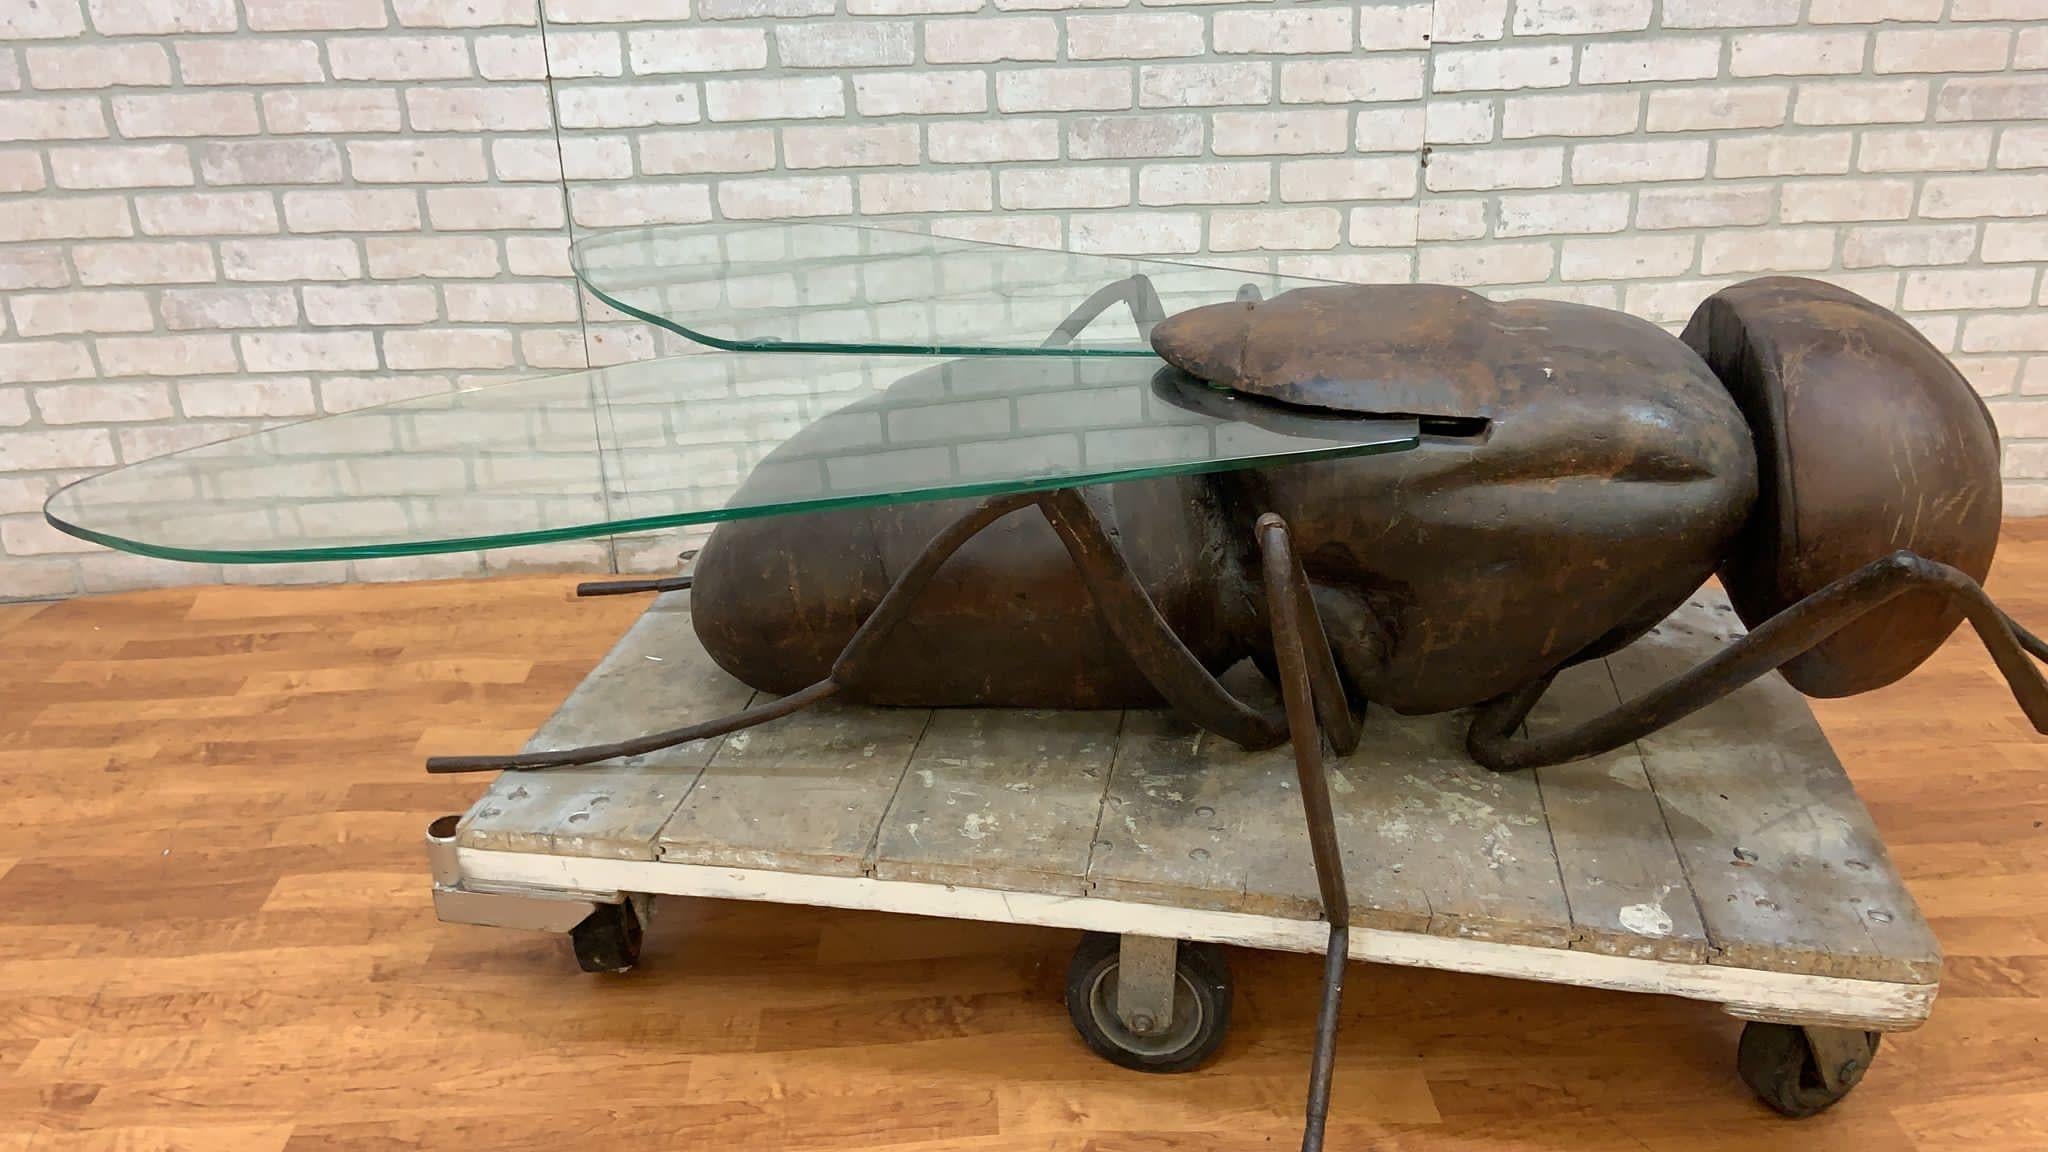 Vintage Francois Melin Stag Style Iron and Glass Wing Fly Coffee Table

The Vintage Francois Melin Stag Style Iron and Glass Wing Fly Coffee Table is a remarkable piece of furniture and art. Crafted in the style of the renowned French sculptor and